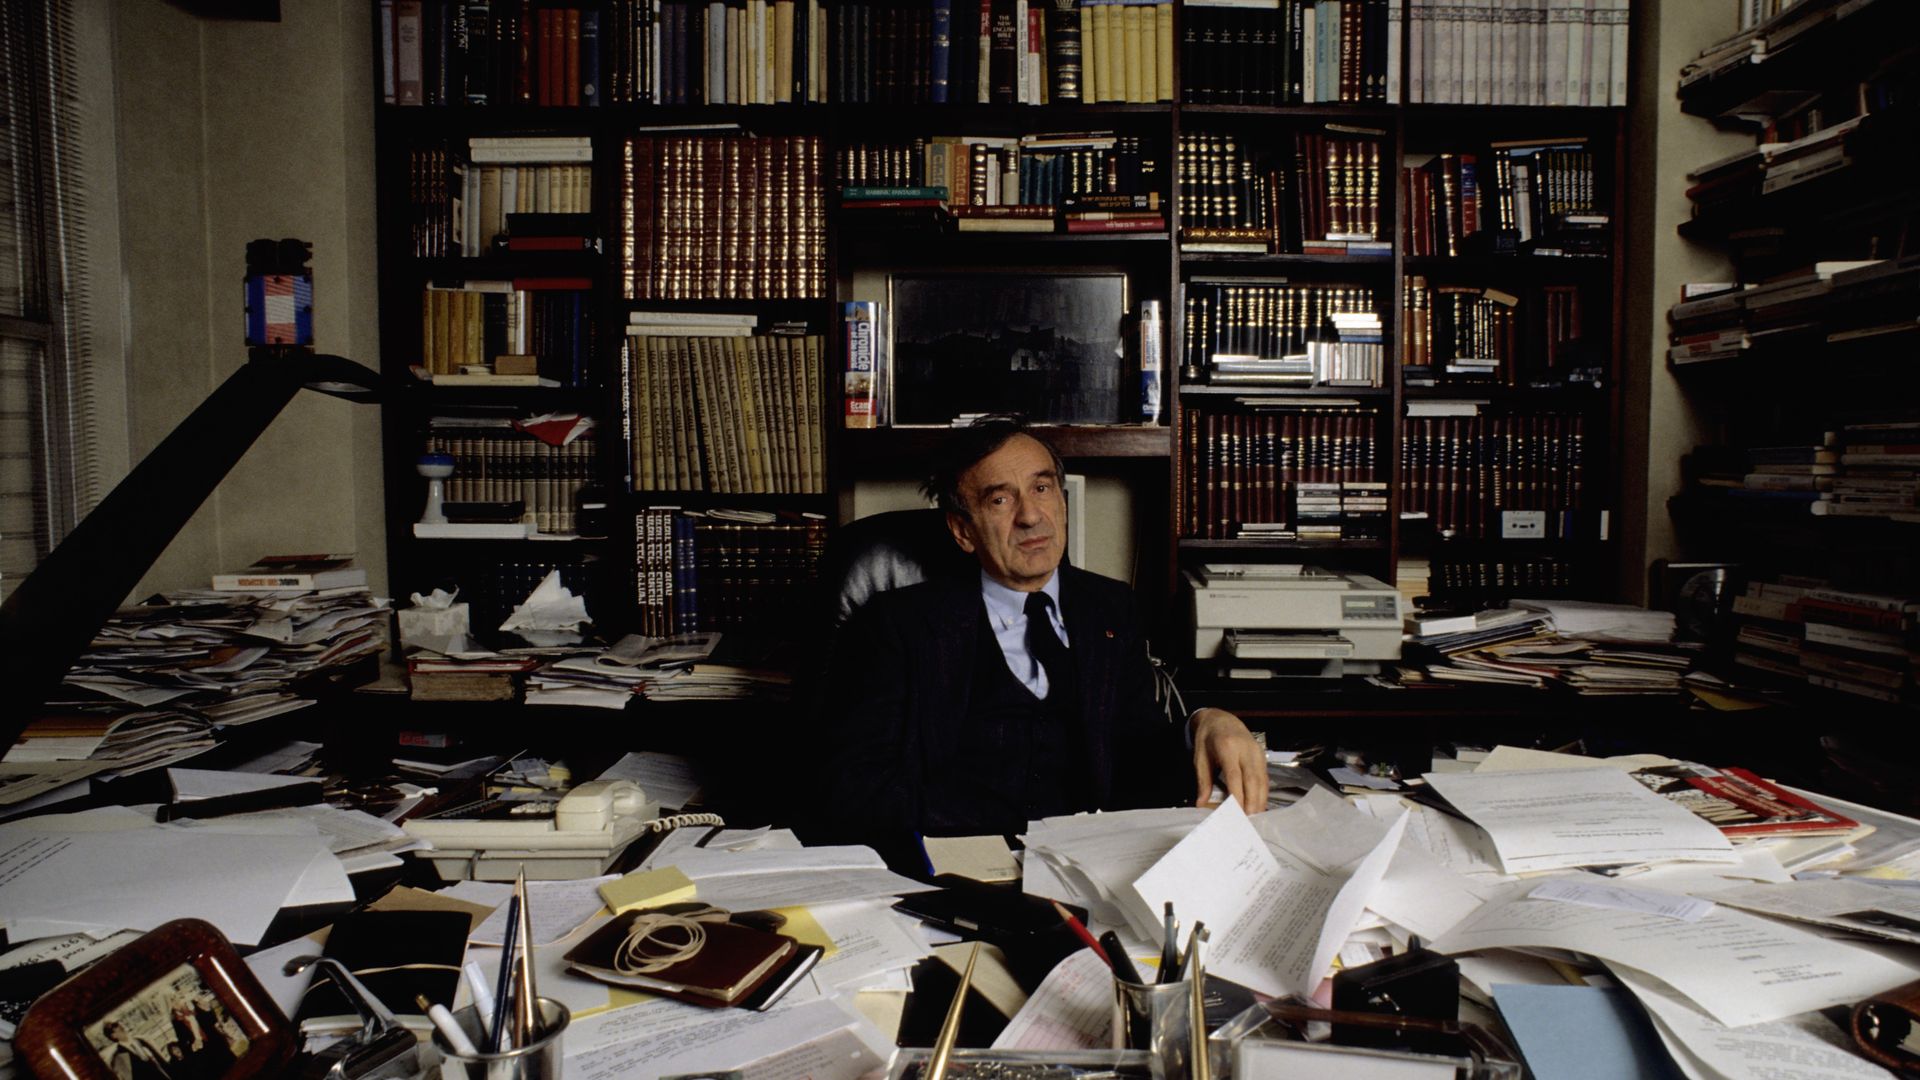 Elie Wiesel sits at a paper-strewn desk with bookshelves in the background 